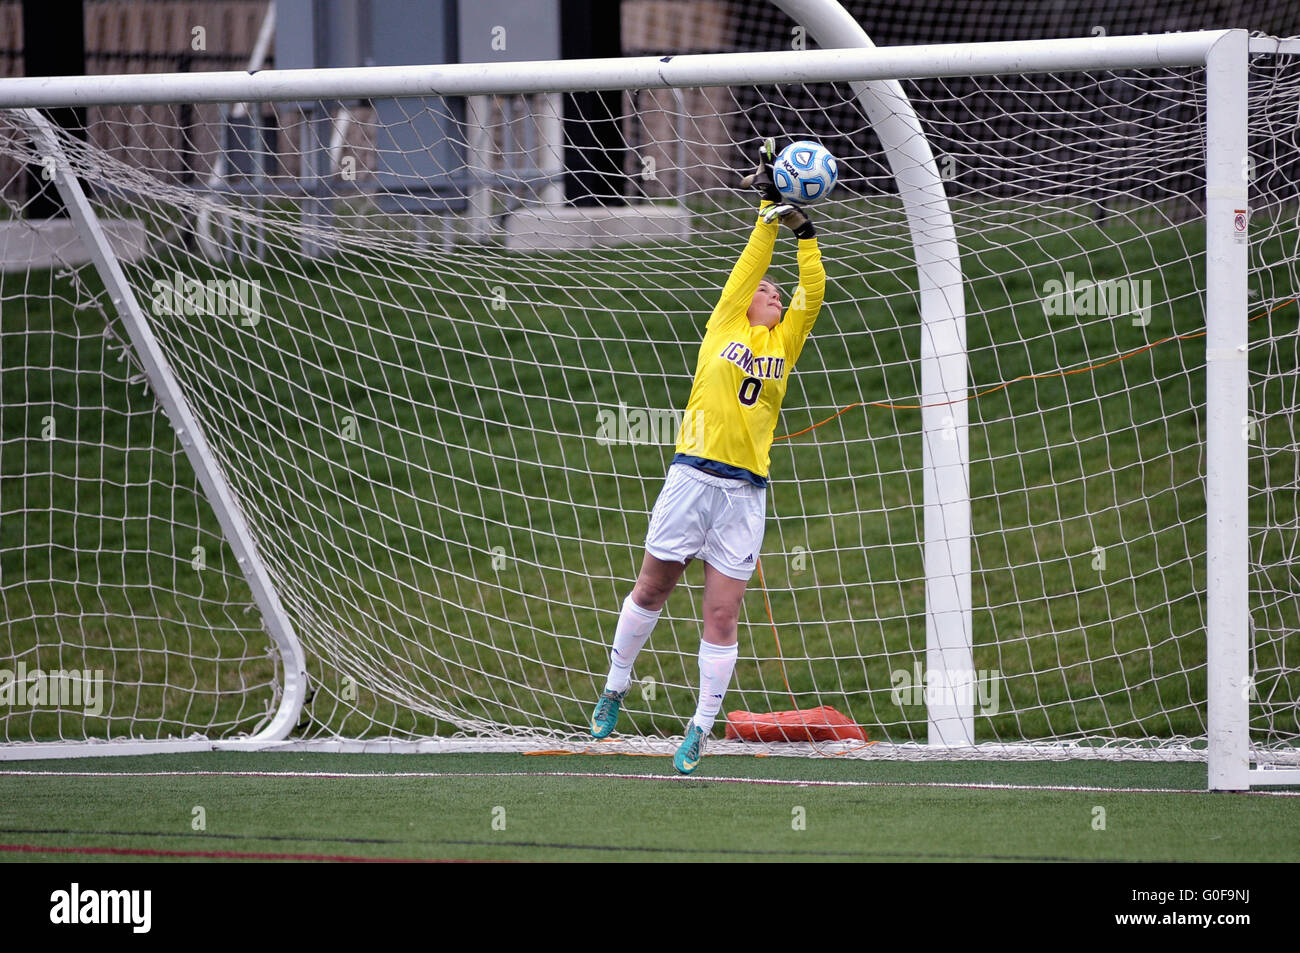 A keeper leaves her feet to make a leaping save on a ball that had been destined for a top corner of the goal. USA. Stock Photo